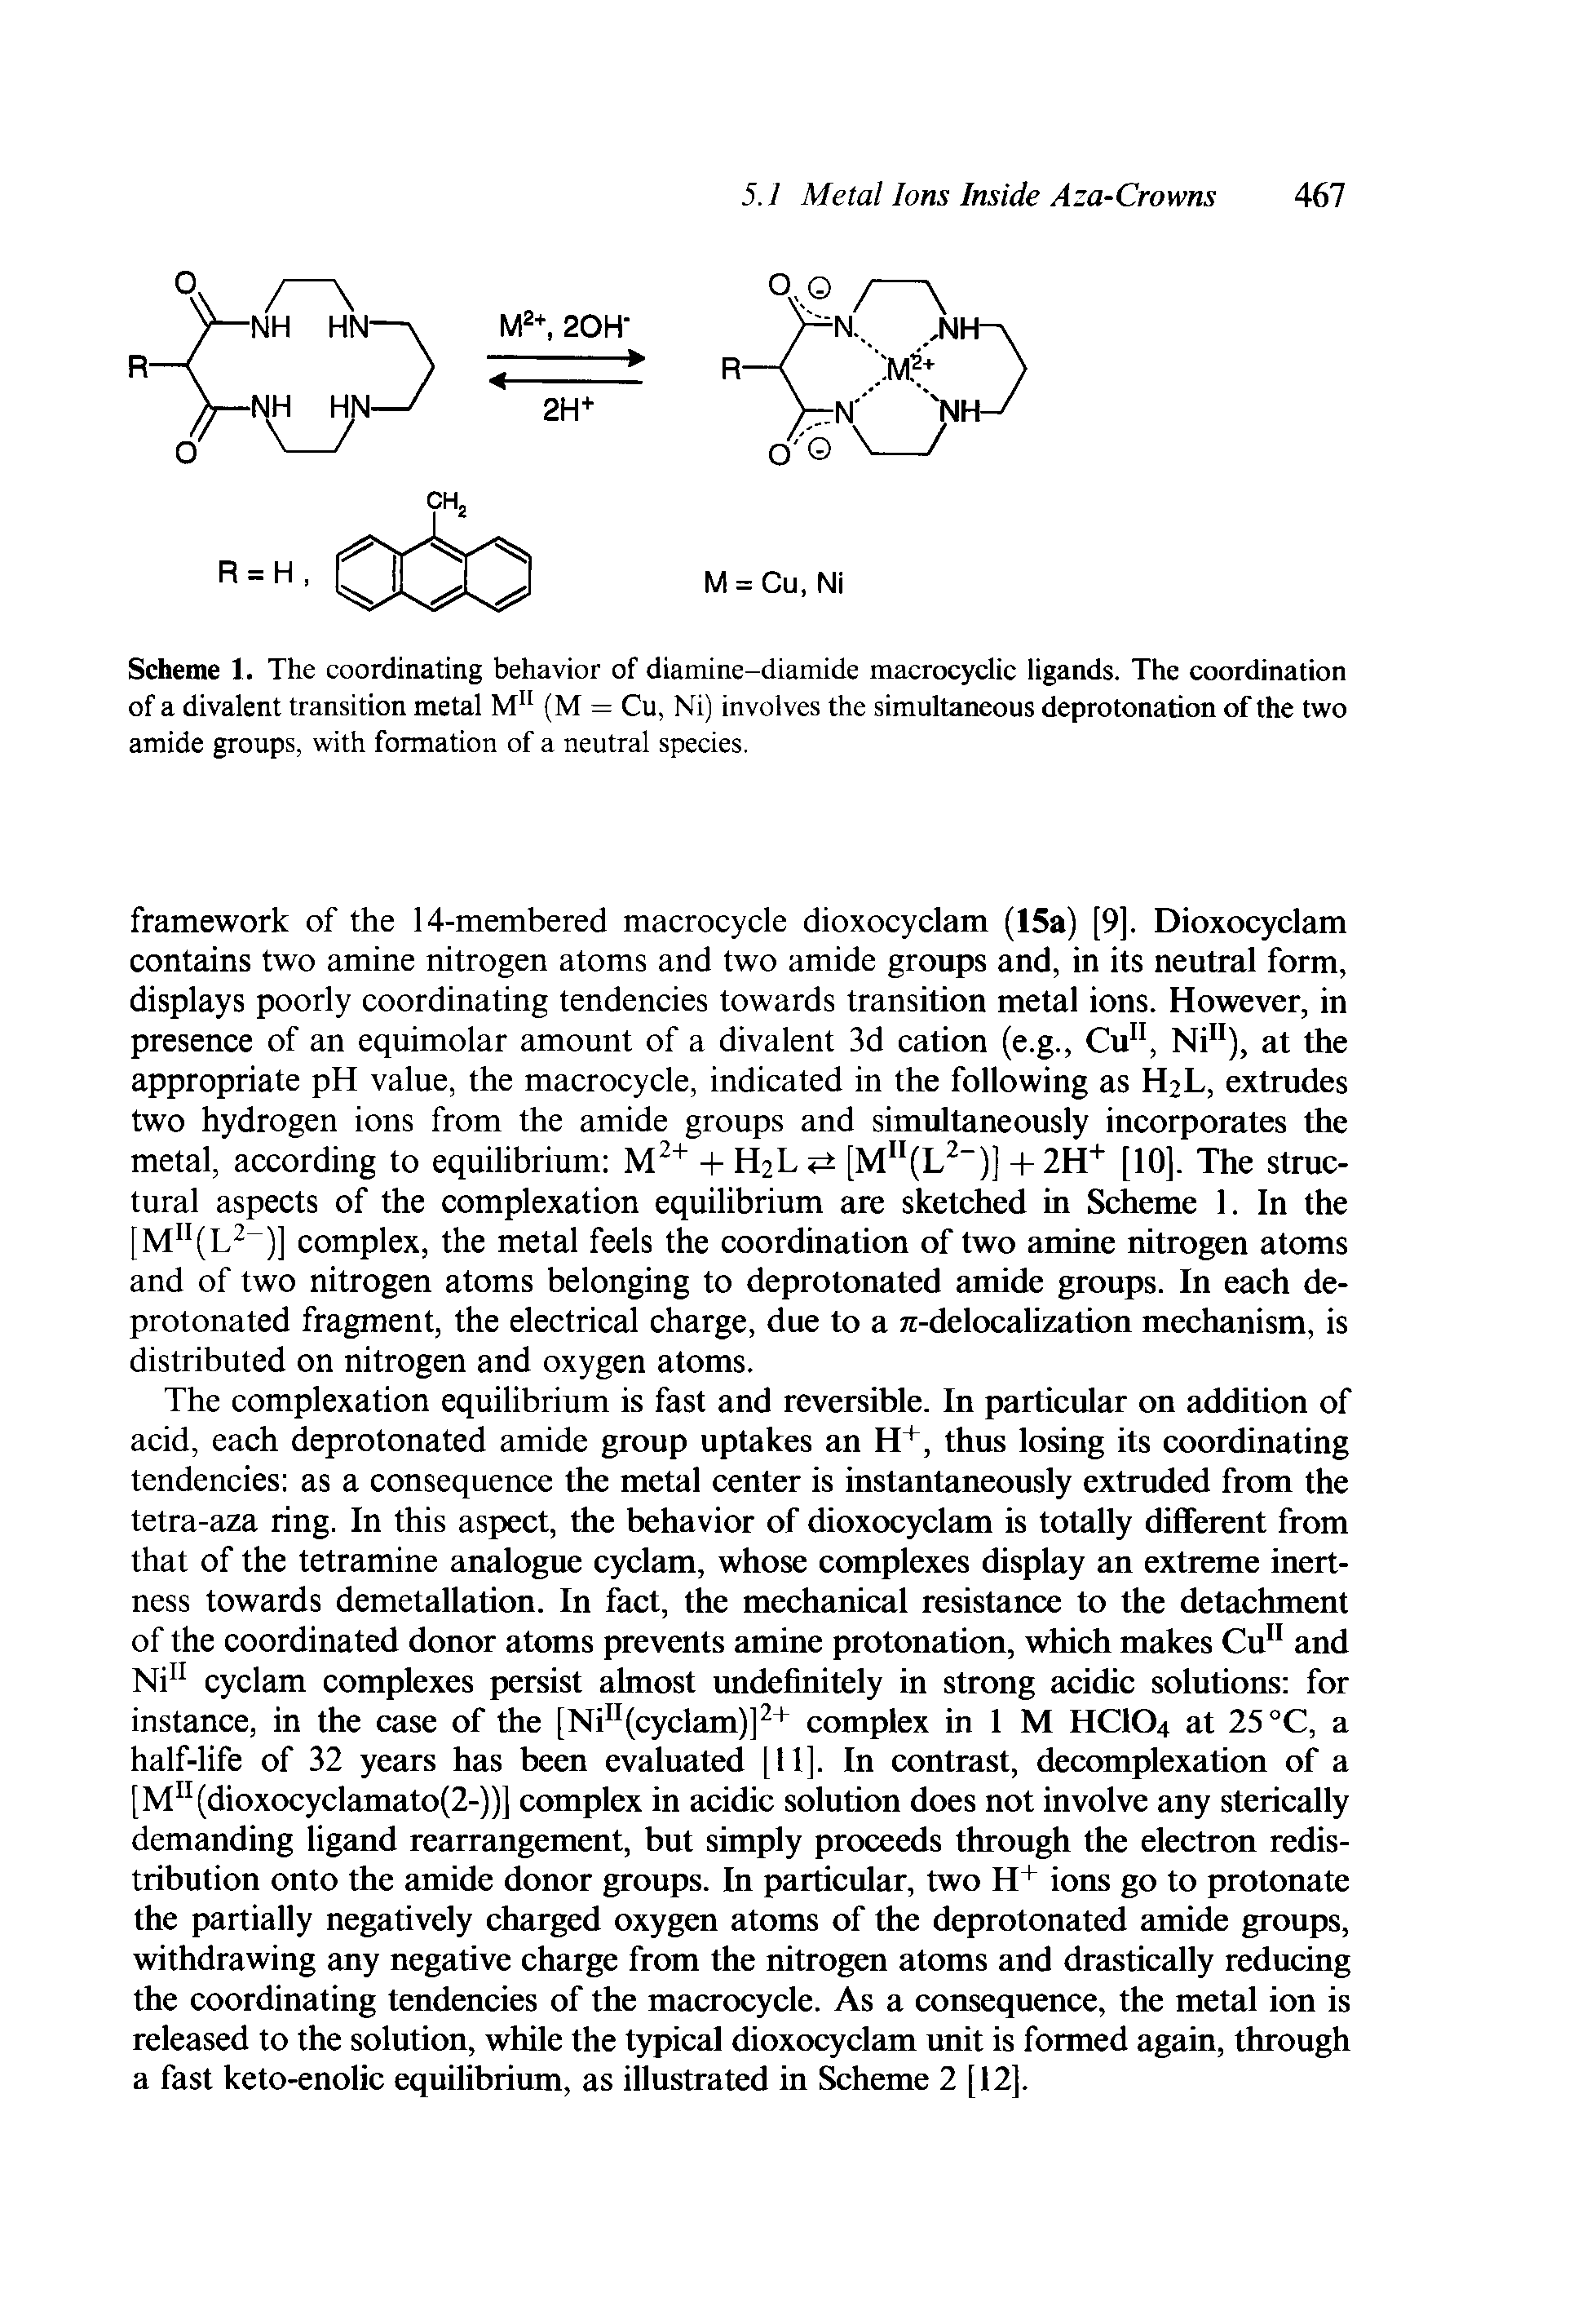 Scheme 1. The coordinating behavior of diamine-diamide macrocyclic ligands. The coordination of a divalent transition metal (M = Cu, Ni) involves the simultaneous deprotonation of the two amide groups, with formation of a neutral species.